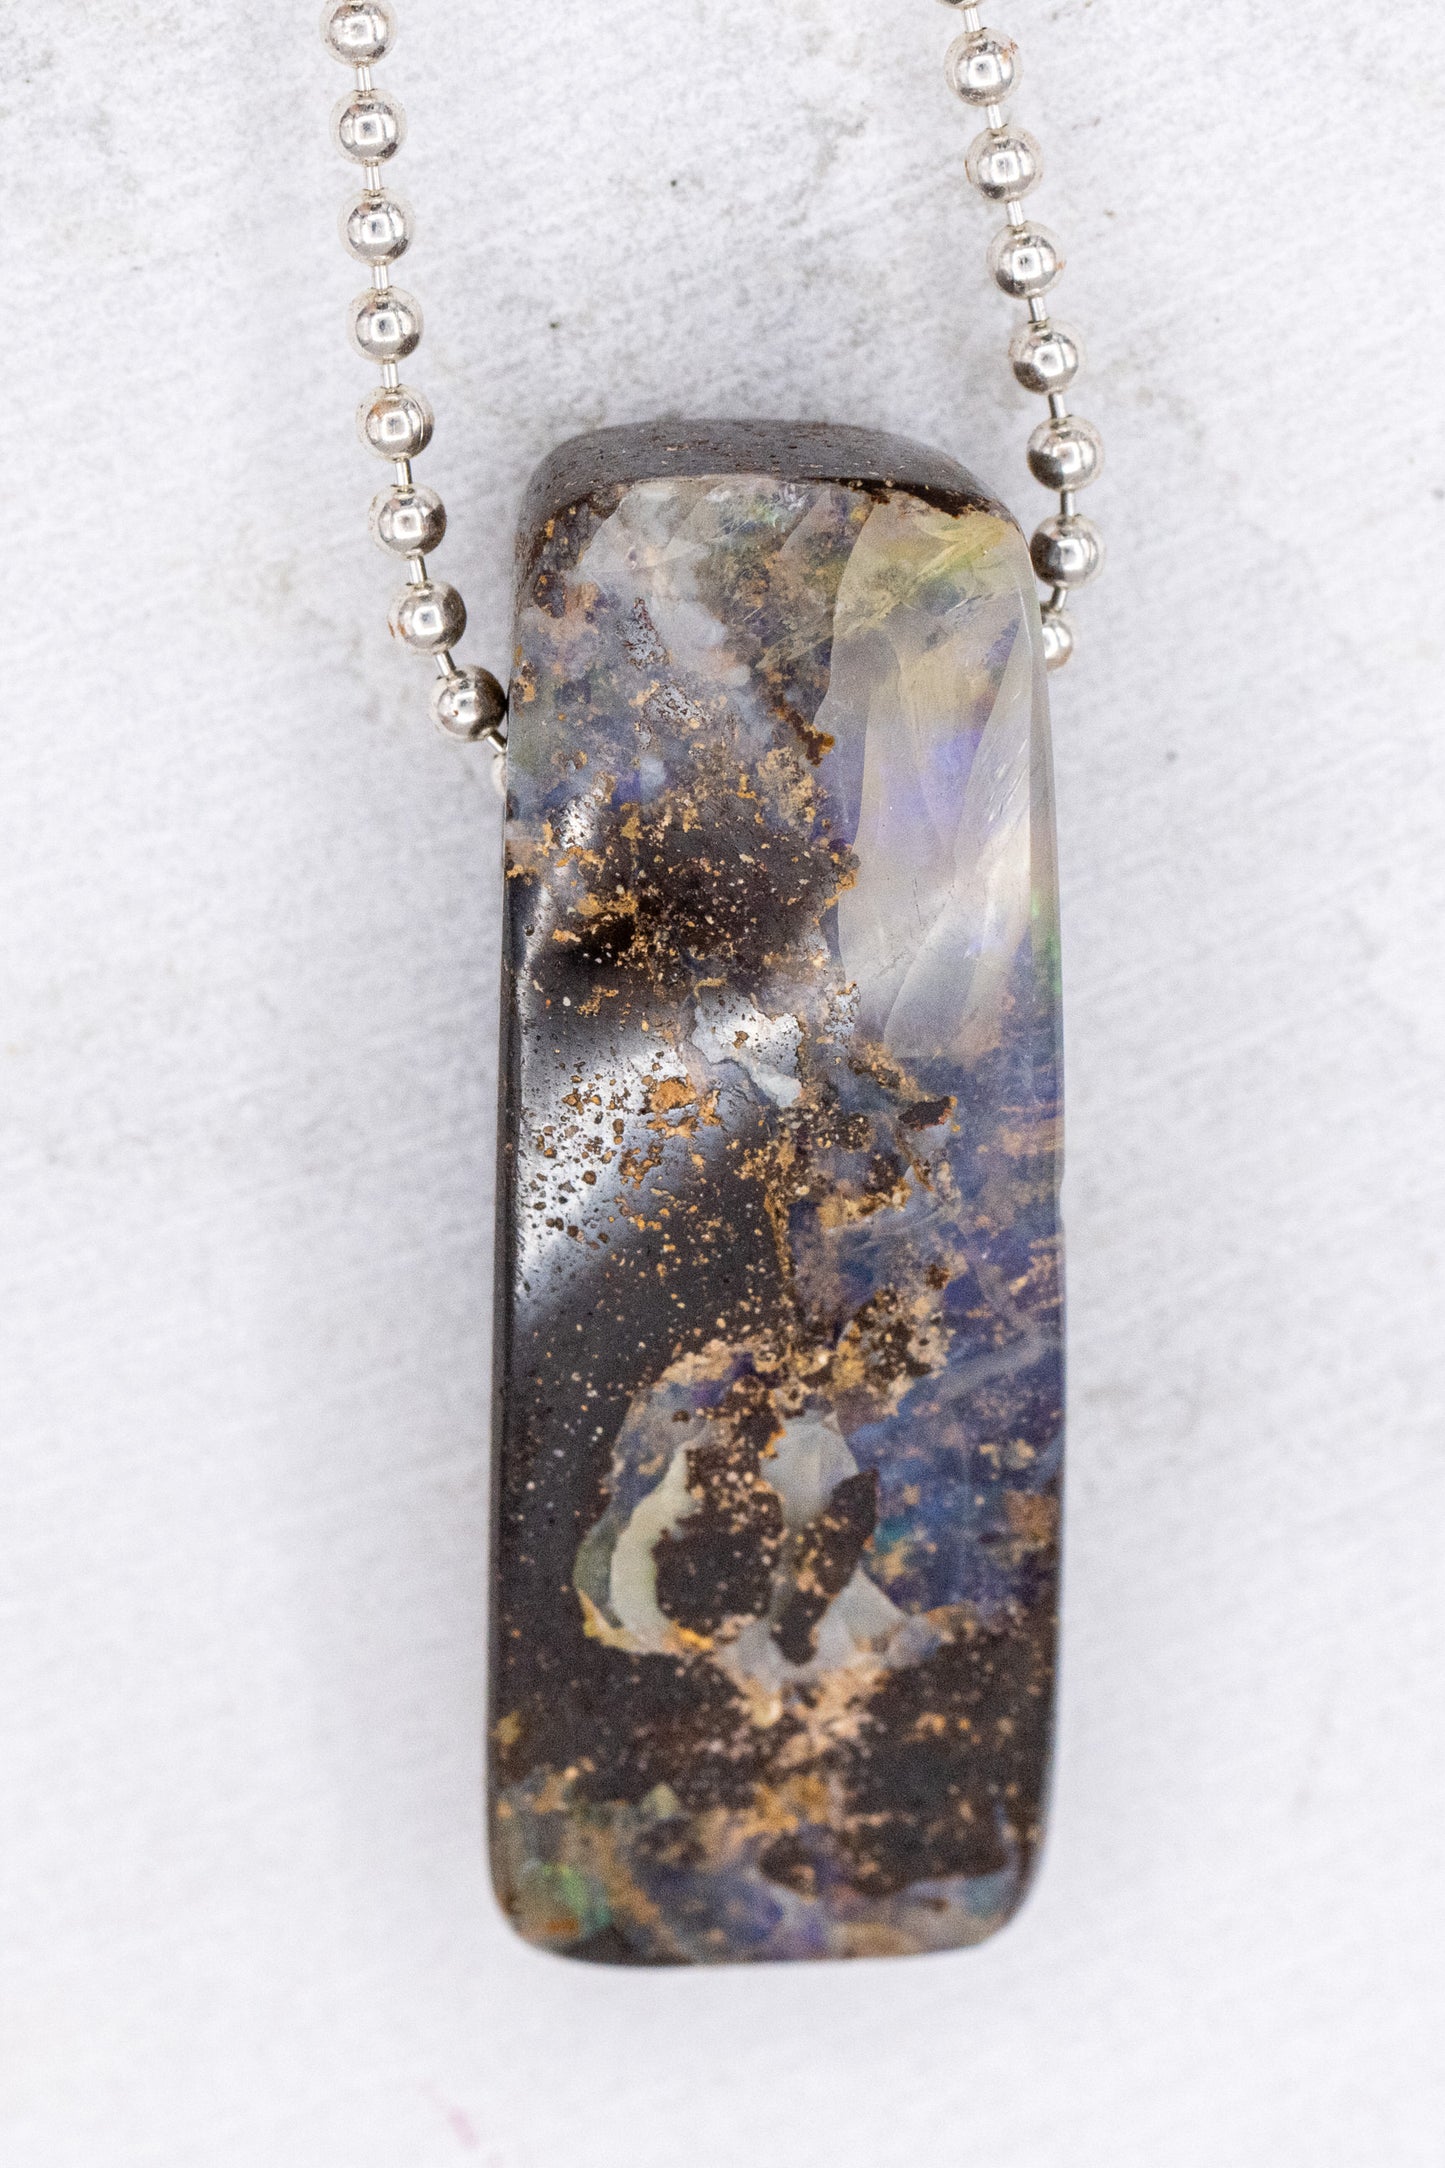 Handmade cassin jewelry necklace with Australian Opal on a silver chain.